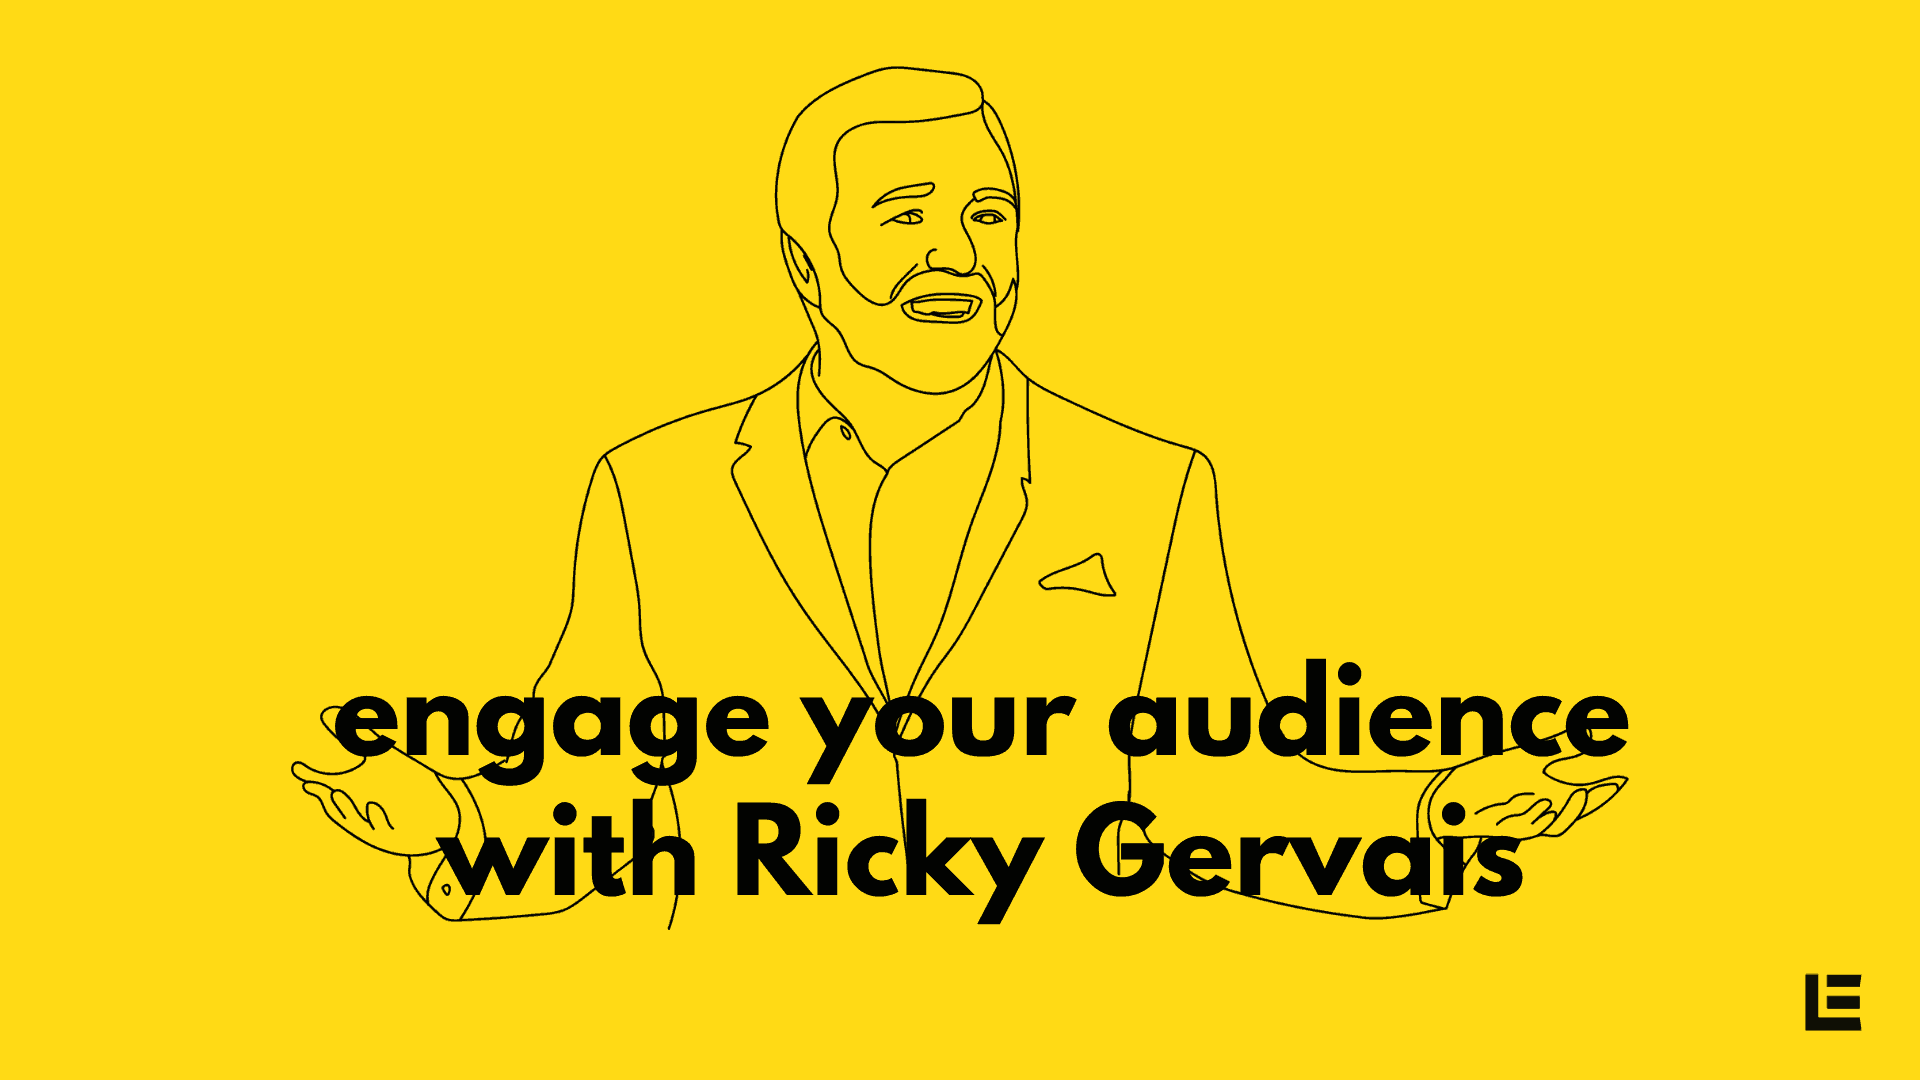 How to win your audience?